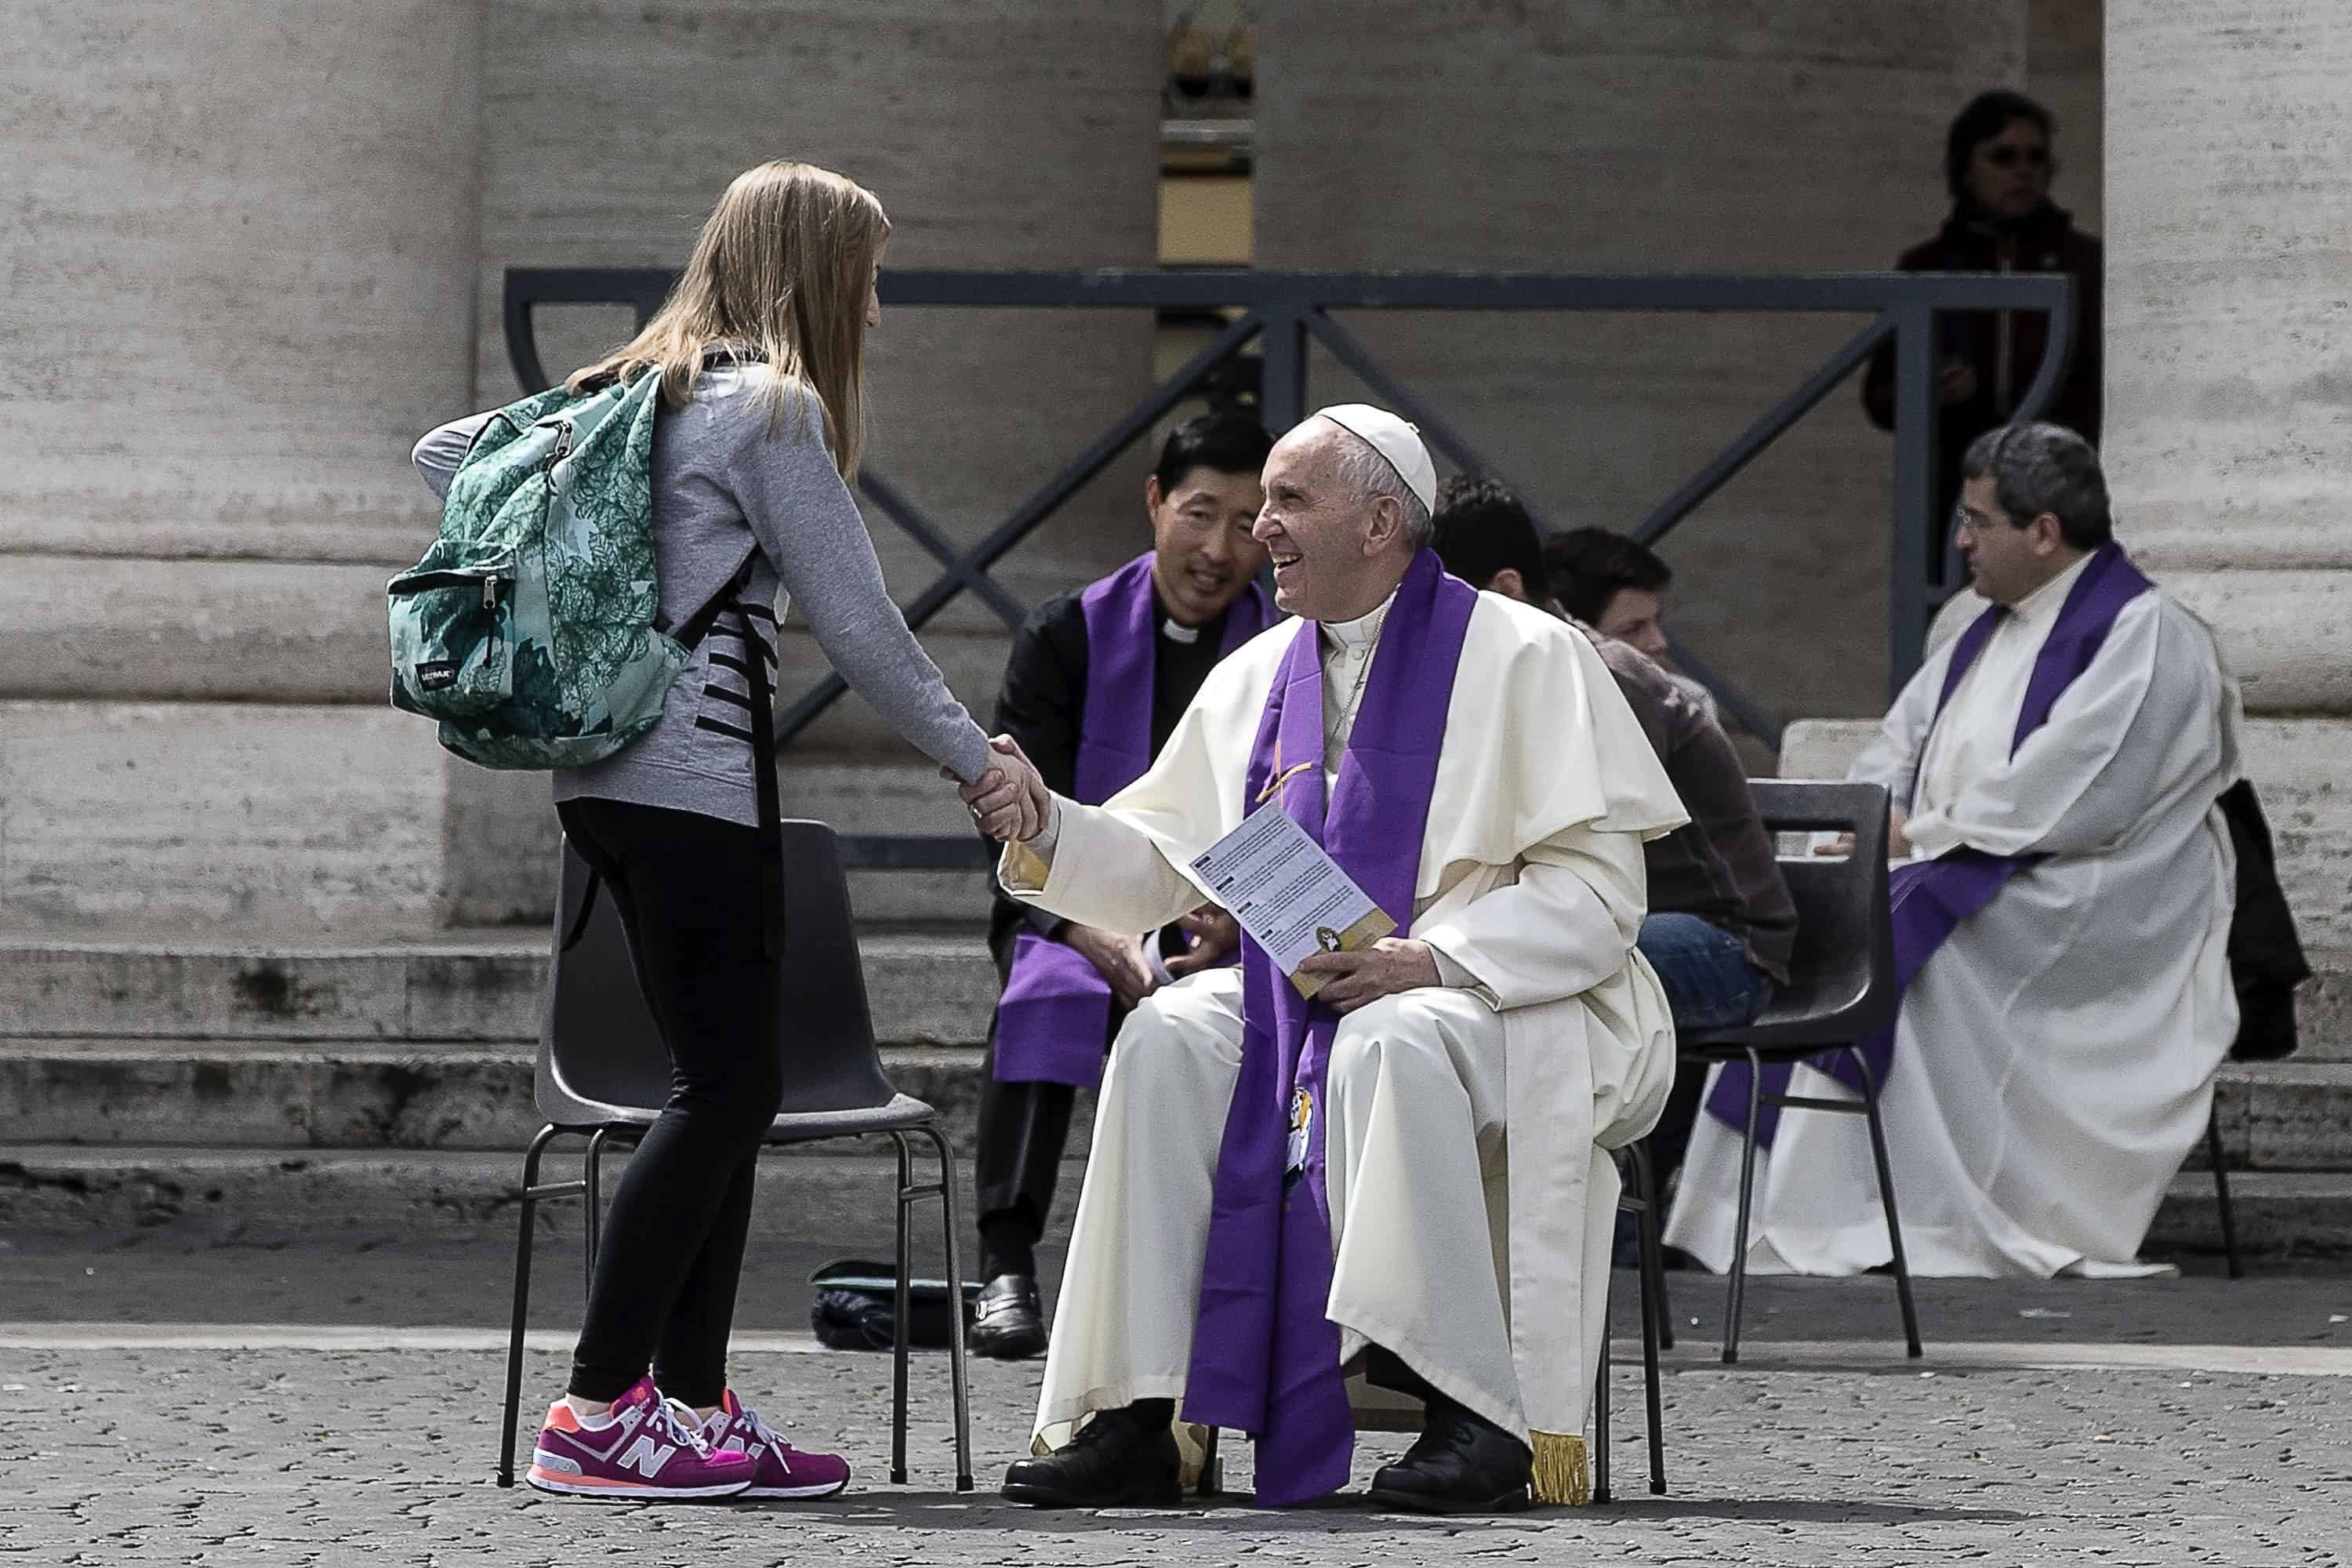 12 Reasons You Shouldn’t Go to Confession This Lent